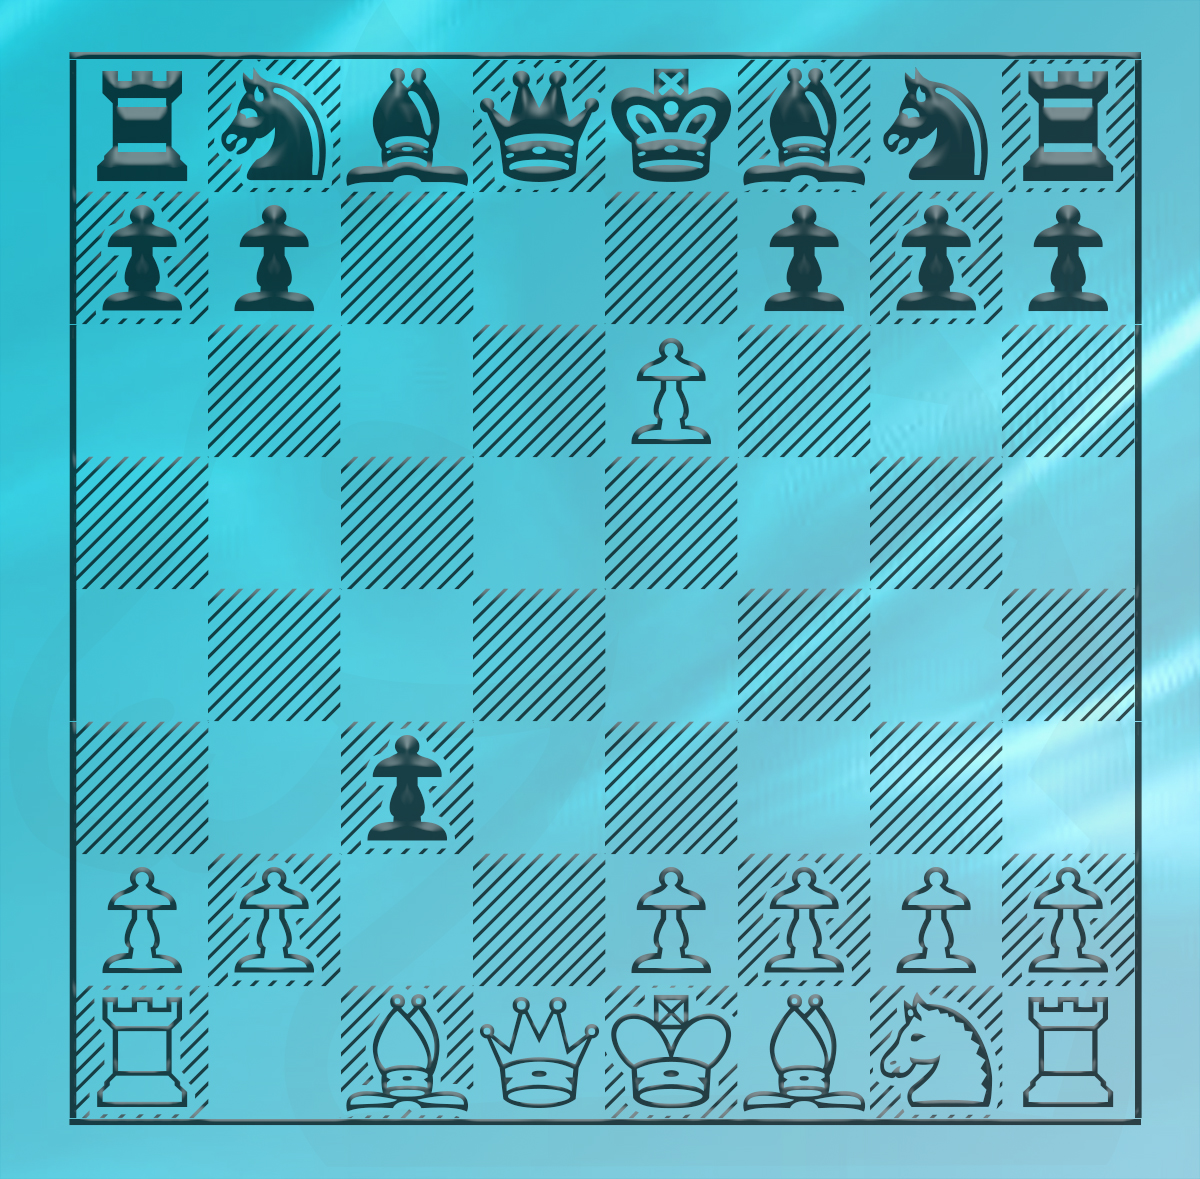 Saemisch Attack in the Alekhine's Defense (1.e4 Nf6 2.e5 Nd5 3.Nc3 Nxc3  4.bxc3 d5 5.Ba3!?